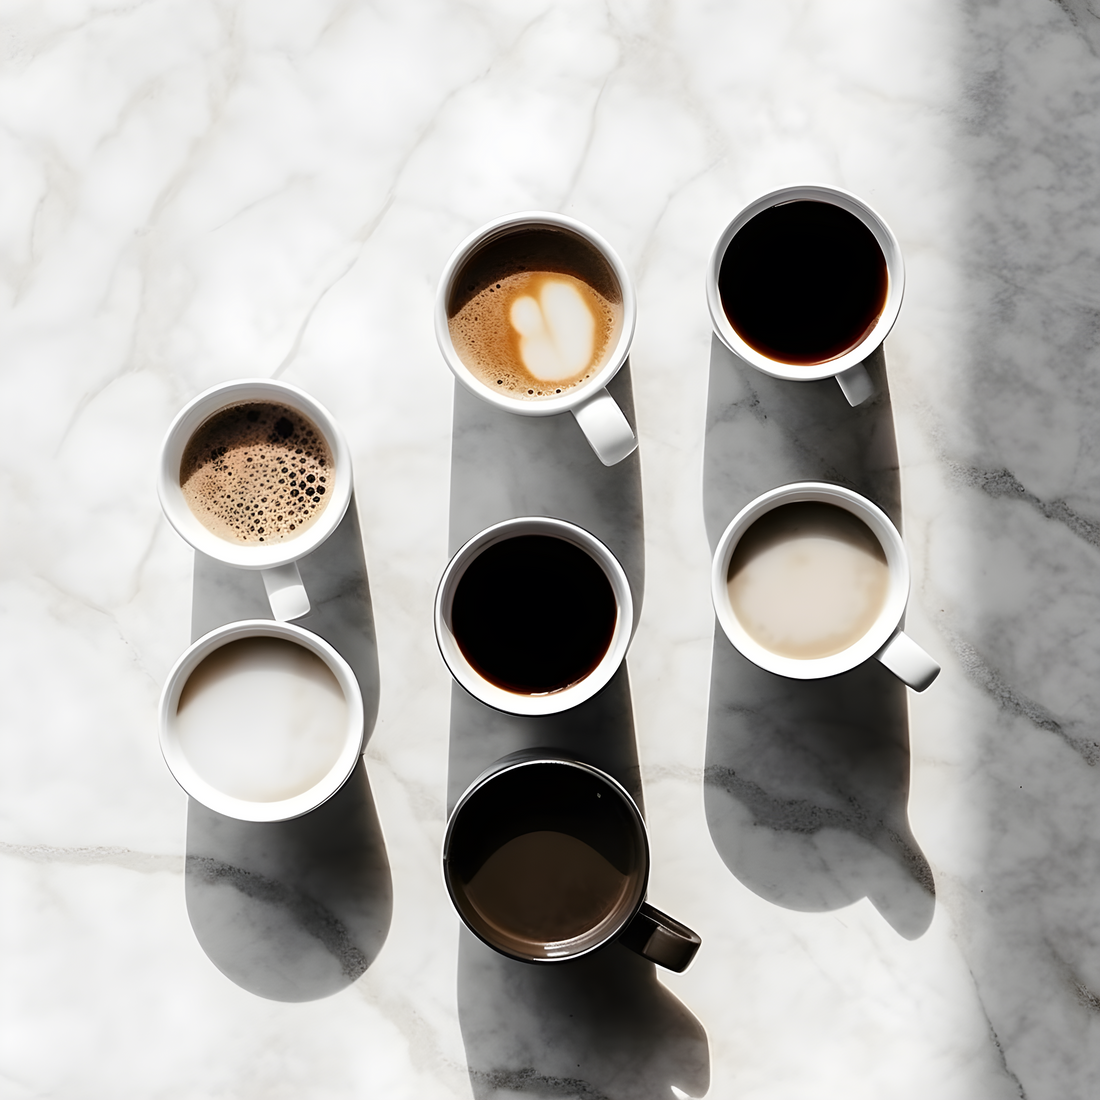 Roasted Origins Six Different Cups of Coffee on Marble Table